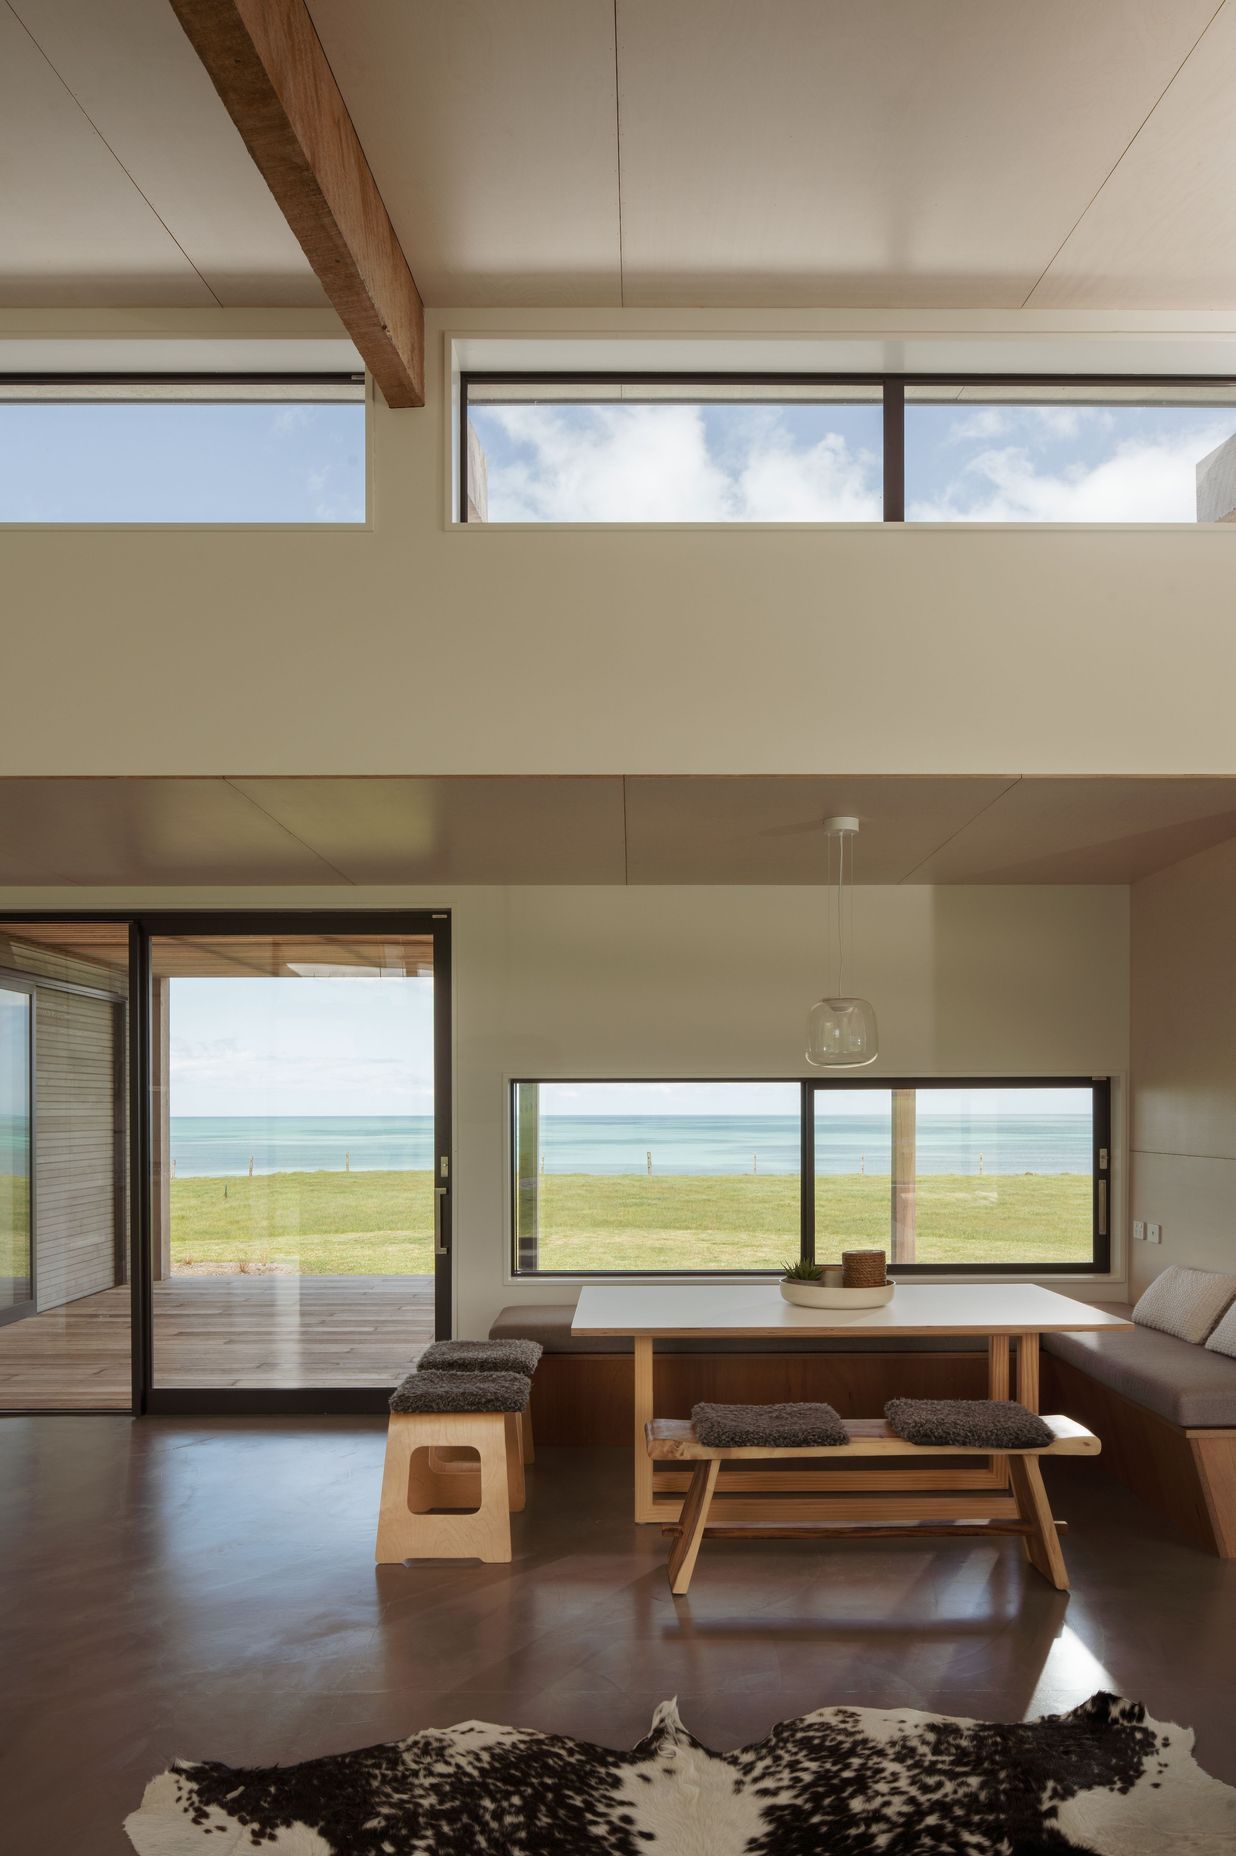 It is, essentially, a beach house, says the architect: "So we have used good quality materials and have kept them really simple and pared back, with a result that is timeless in its design and highly functional."